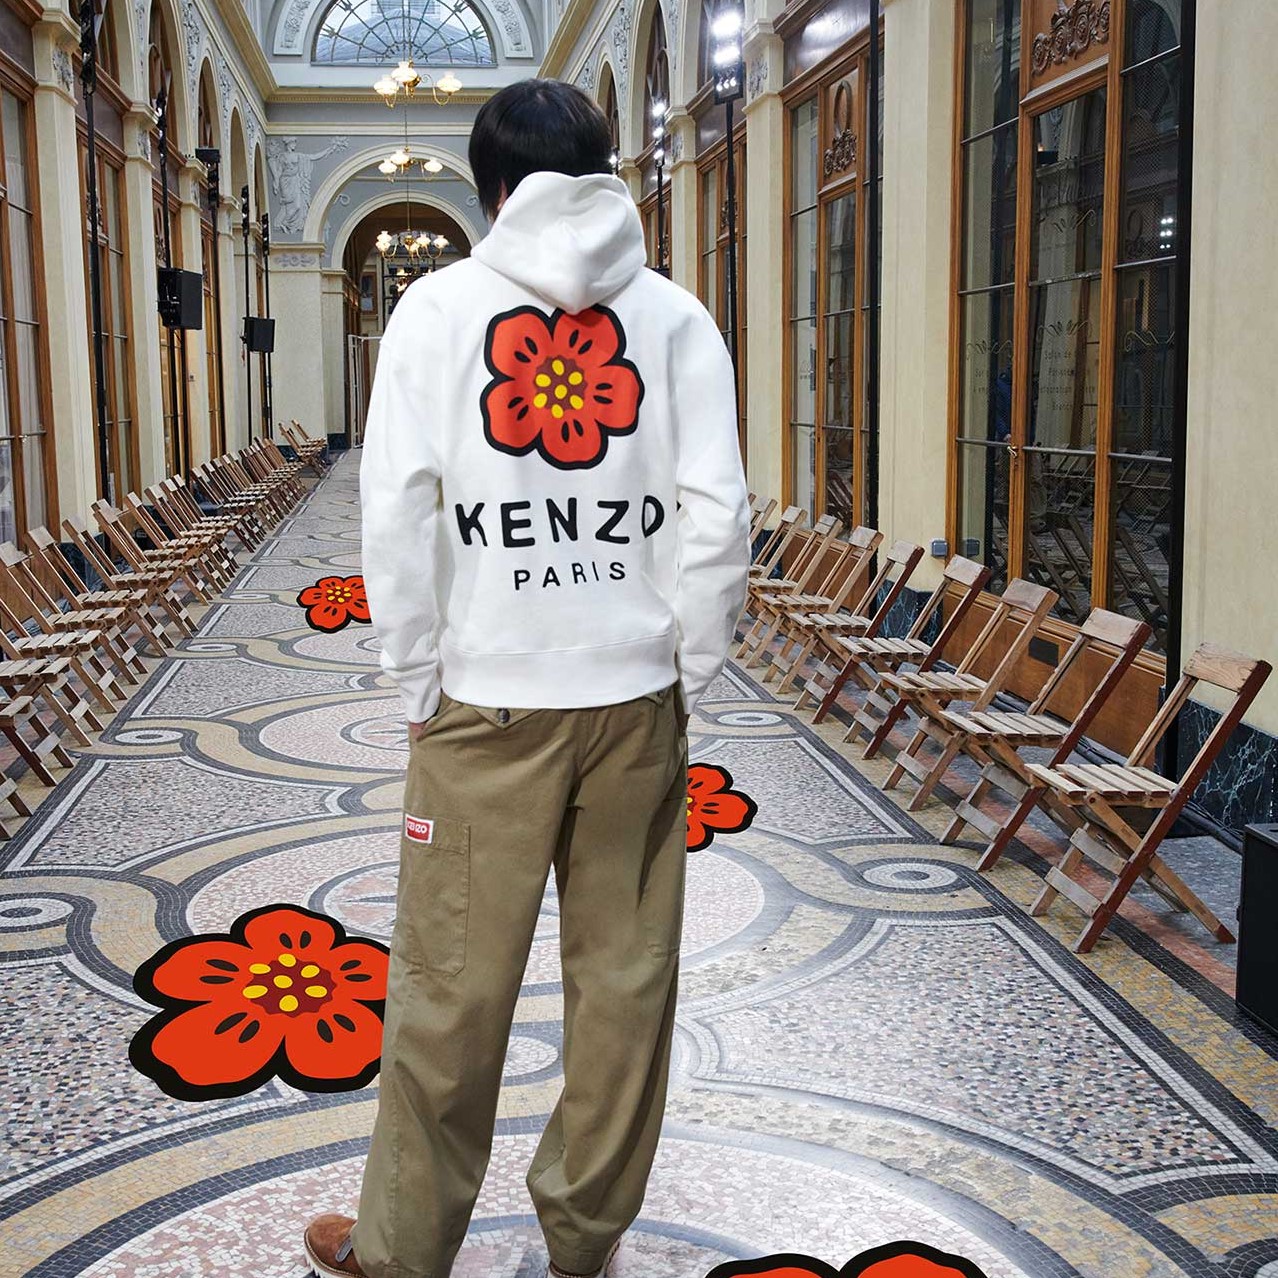 Kenzo limited-edition NFT drop: Everything to know about the collection